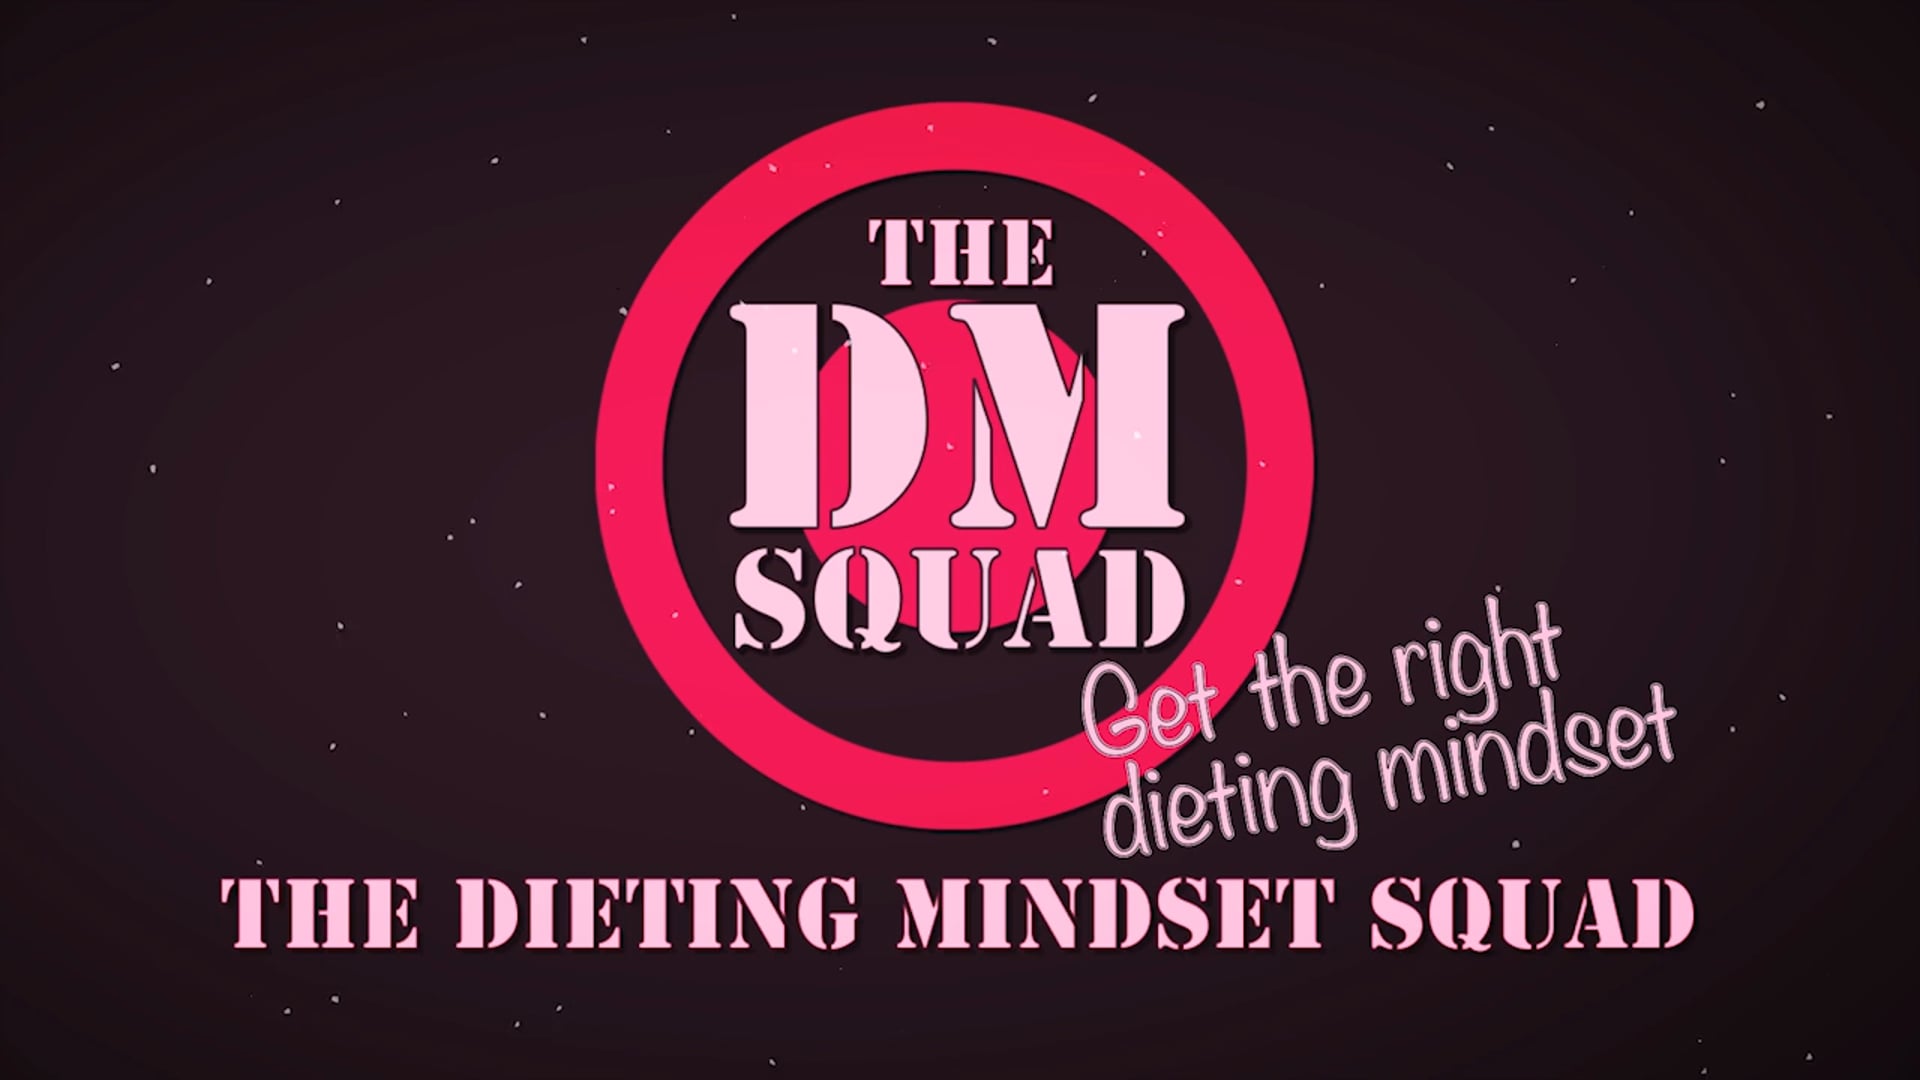 Welcome To The Get The Right Dieting Mindset Programme